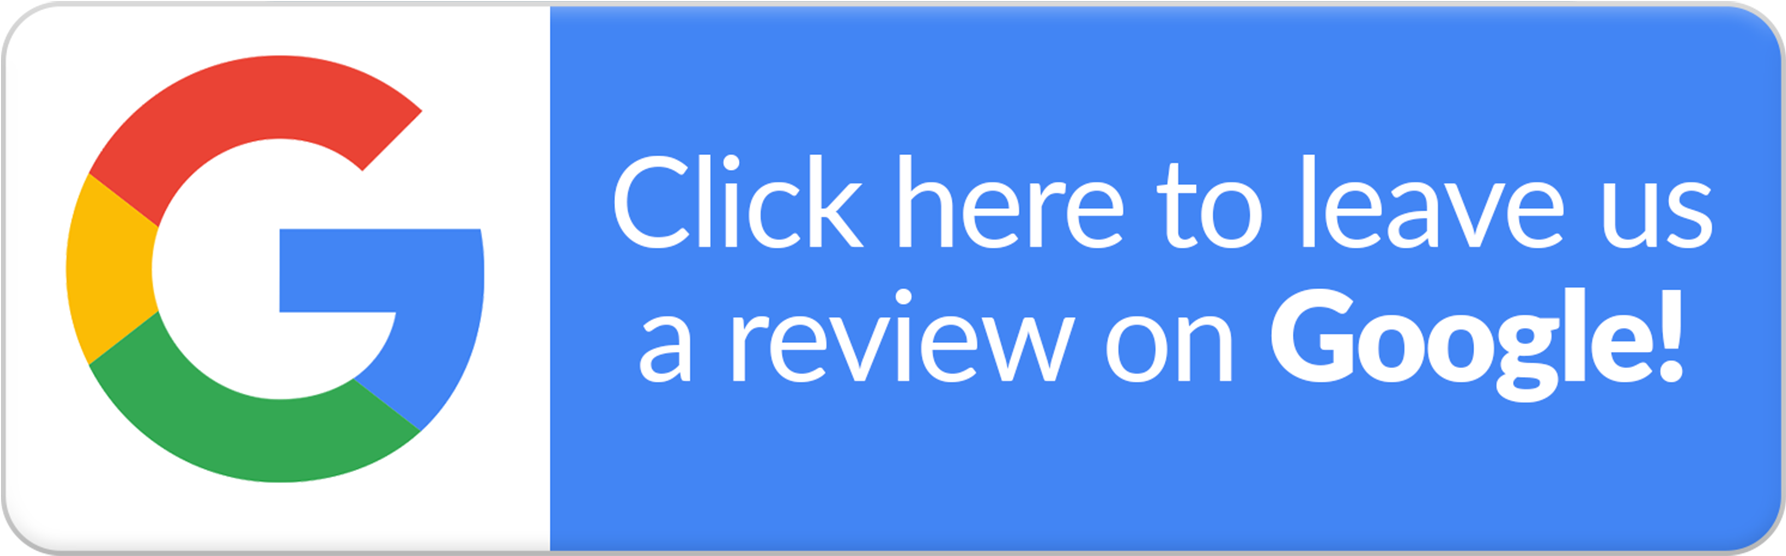 click here to leave us a review on google